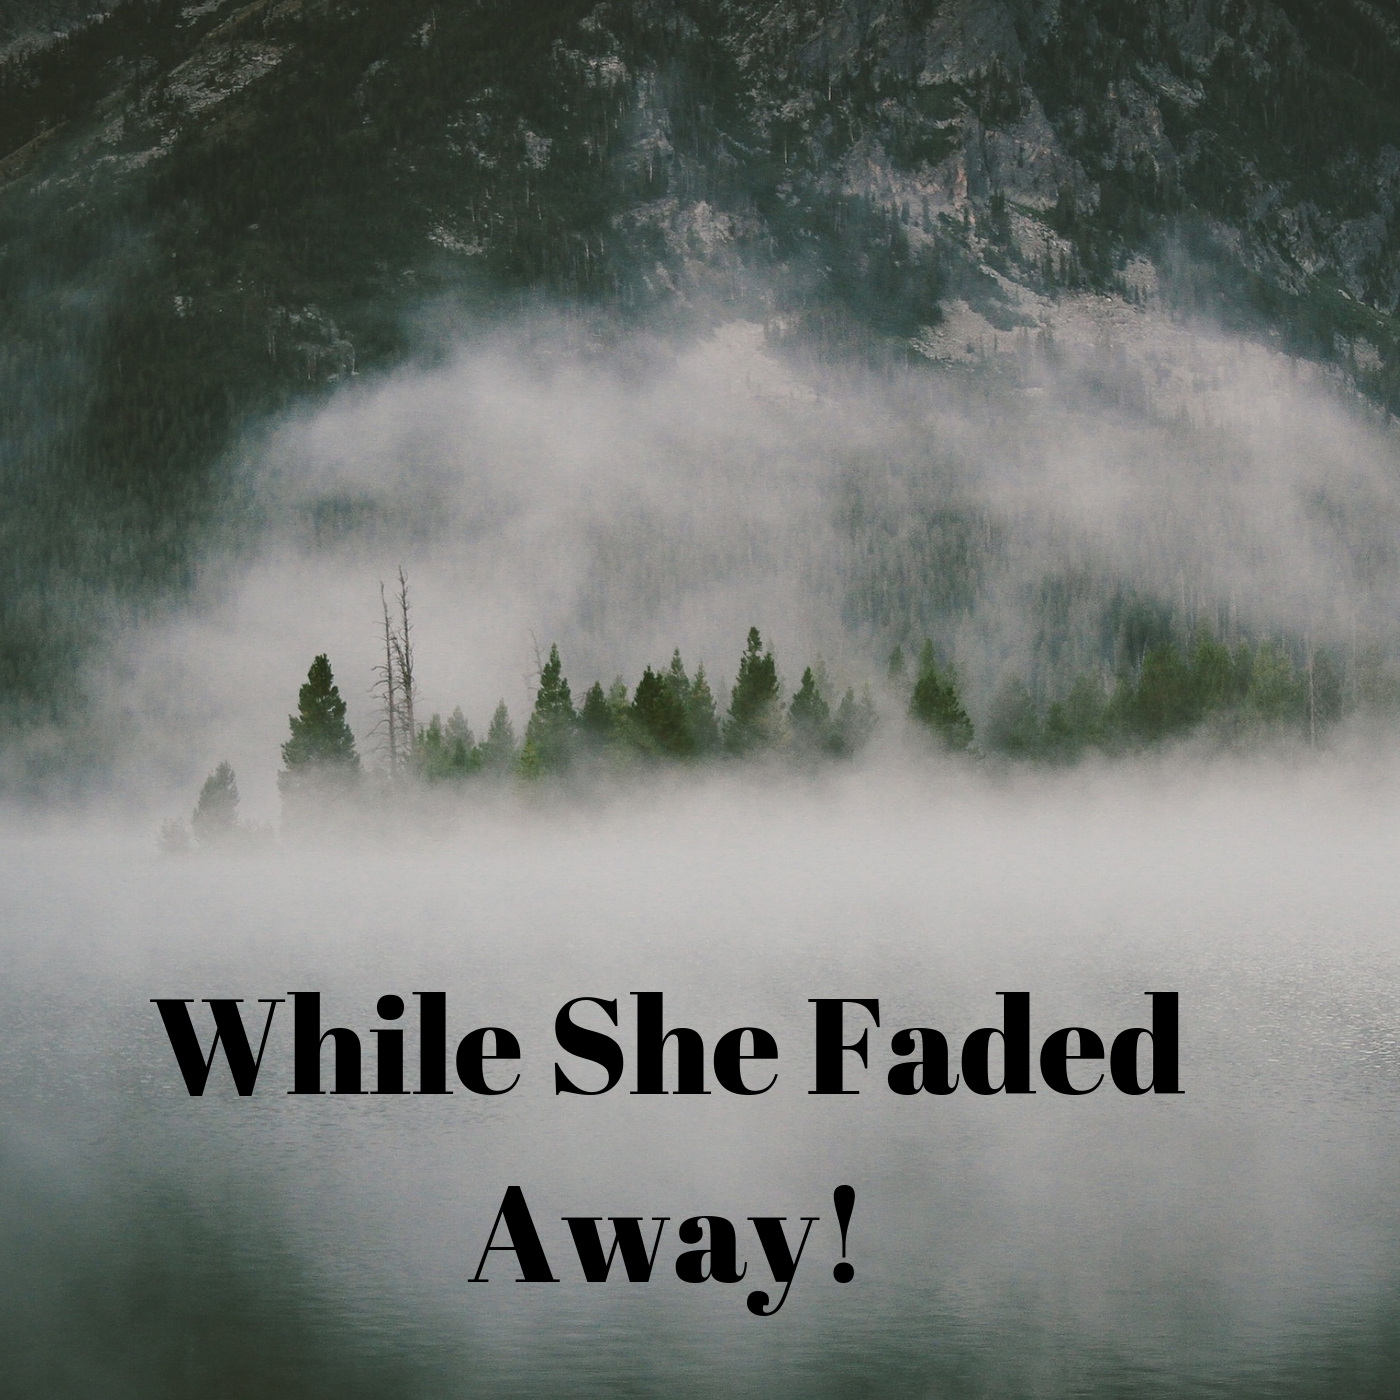 While She Faded Away